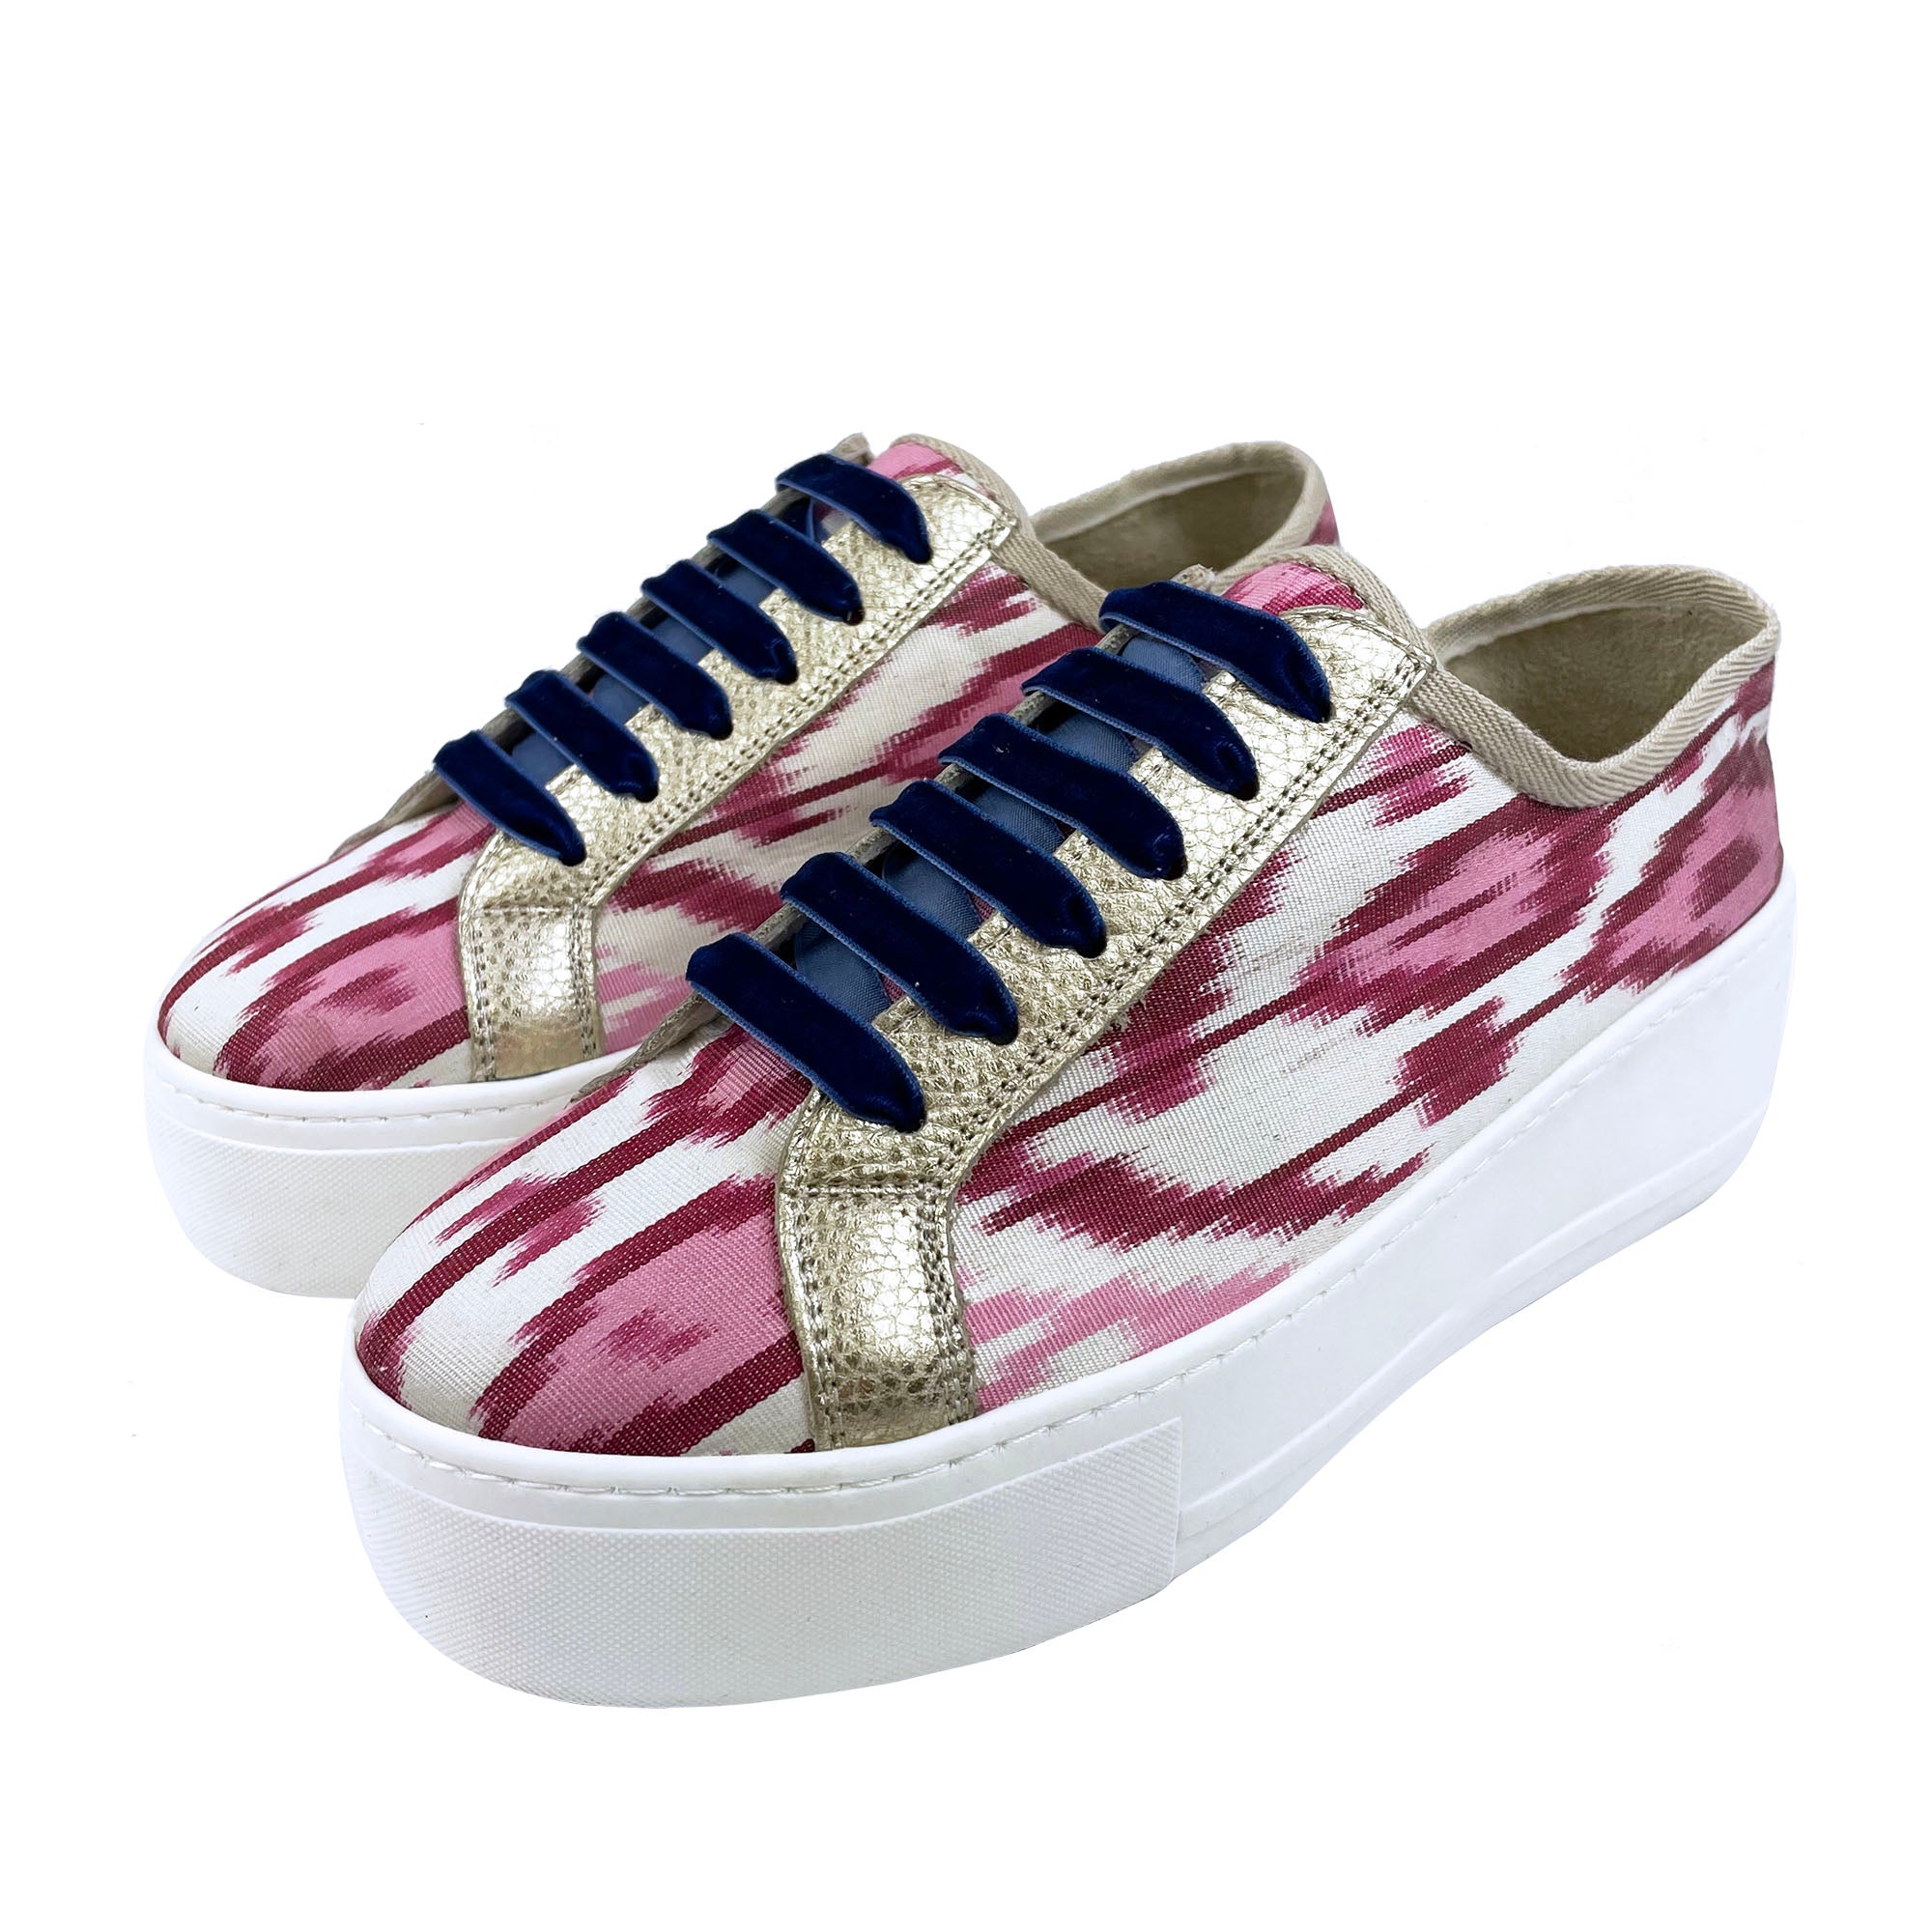 Pink, red and white Ikat silk platform sneakers with gold metallic leather and navy velvet laces